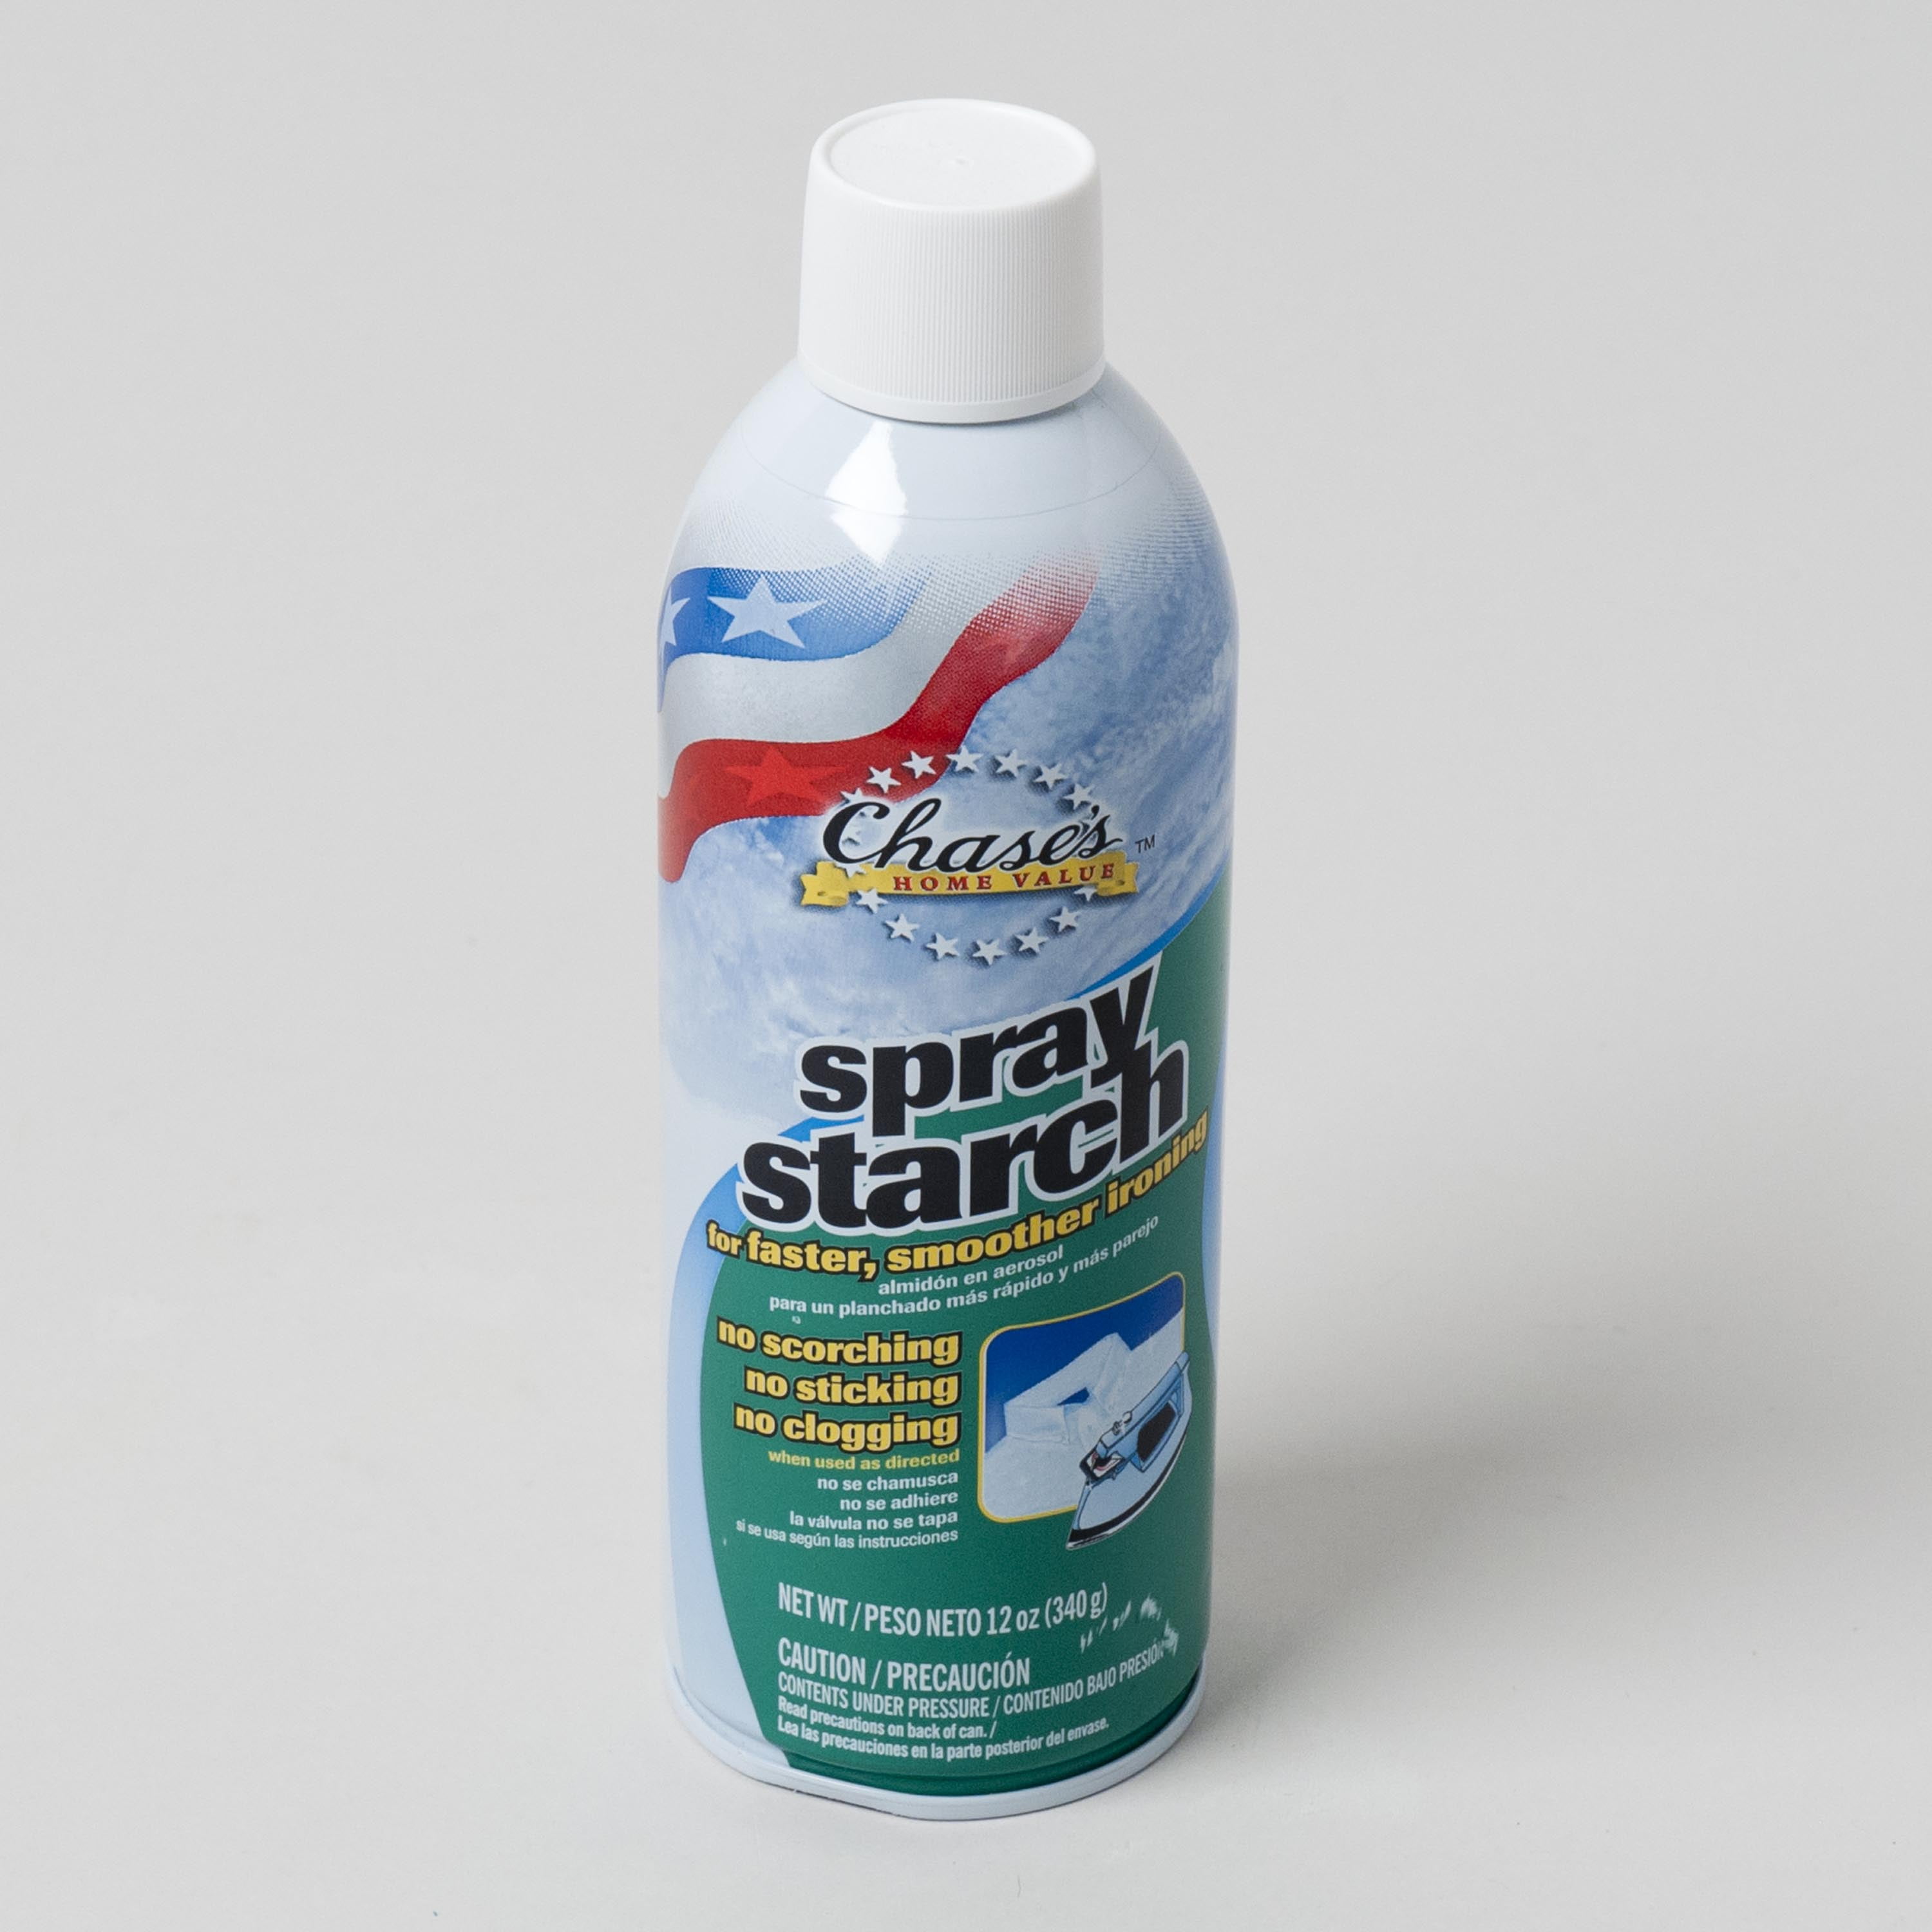 10 Genius Spray Starch Hacks to Solve Your Household Pet Peeves